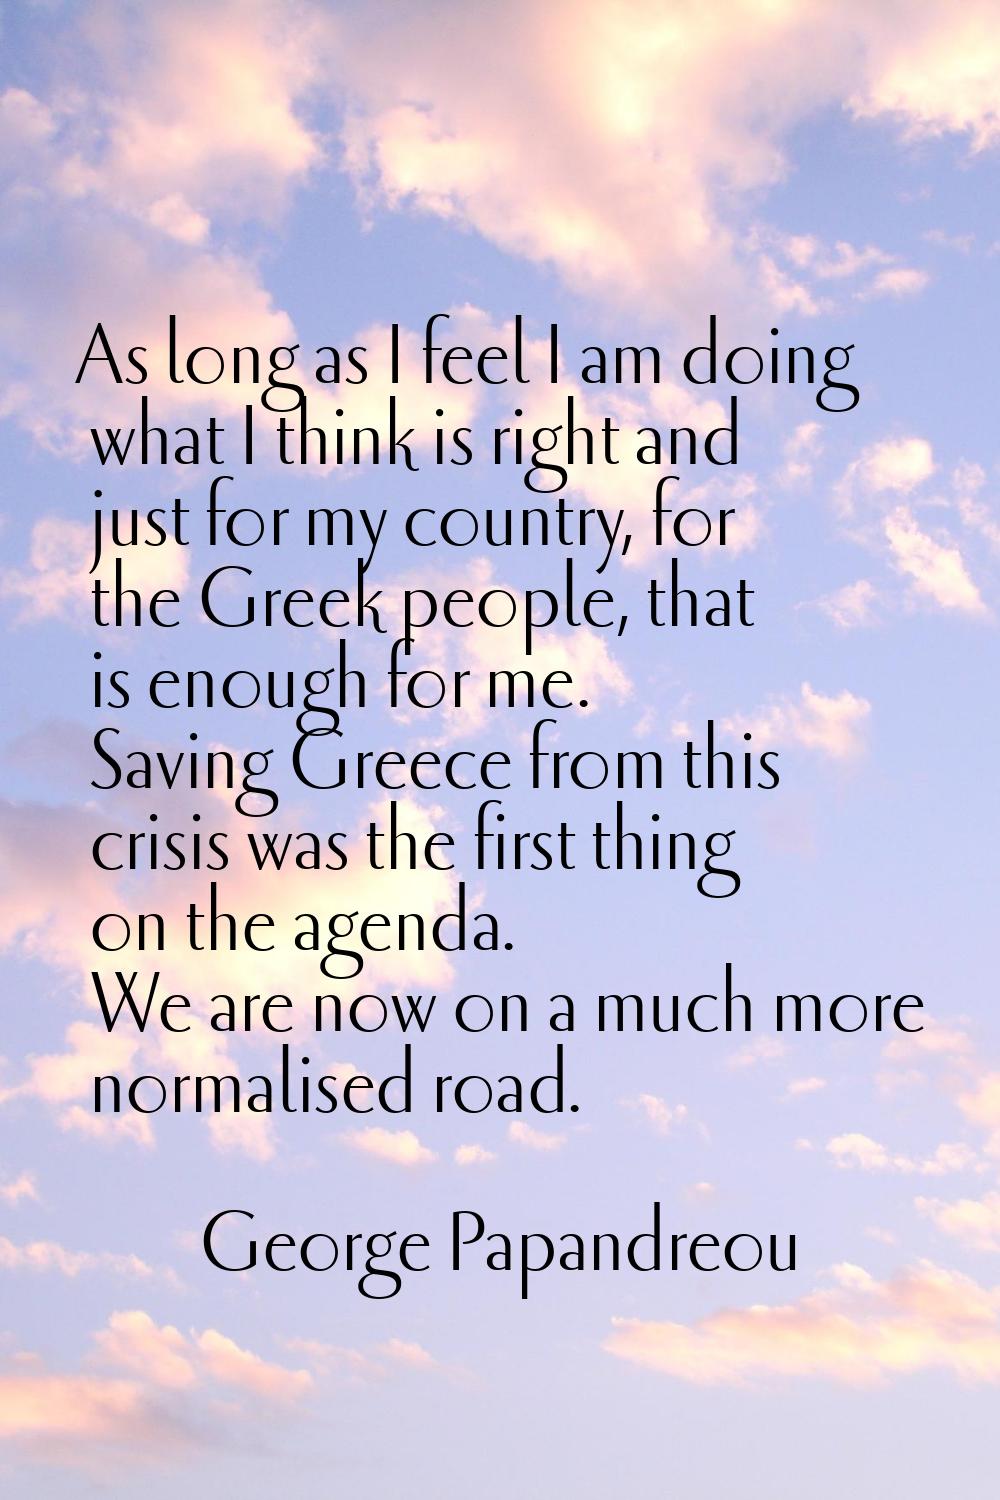 As long as I feel I am doing what I think is right and just for my country, for the Greek people, t